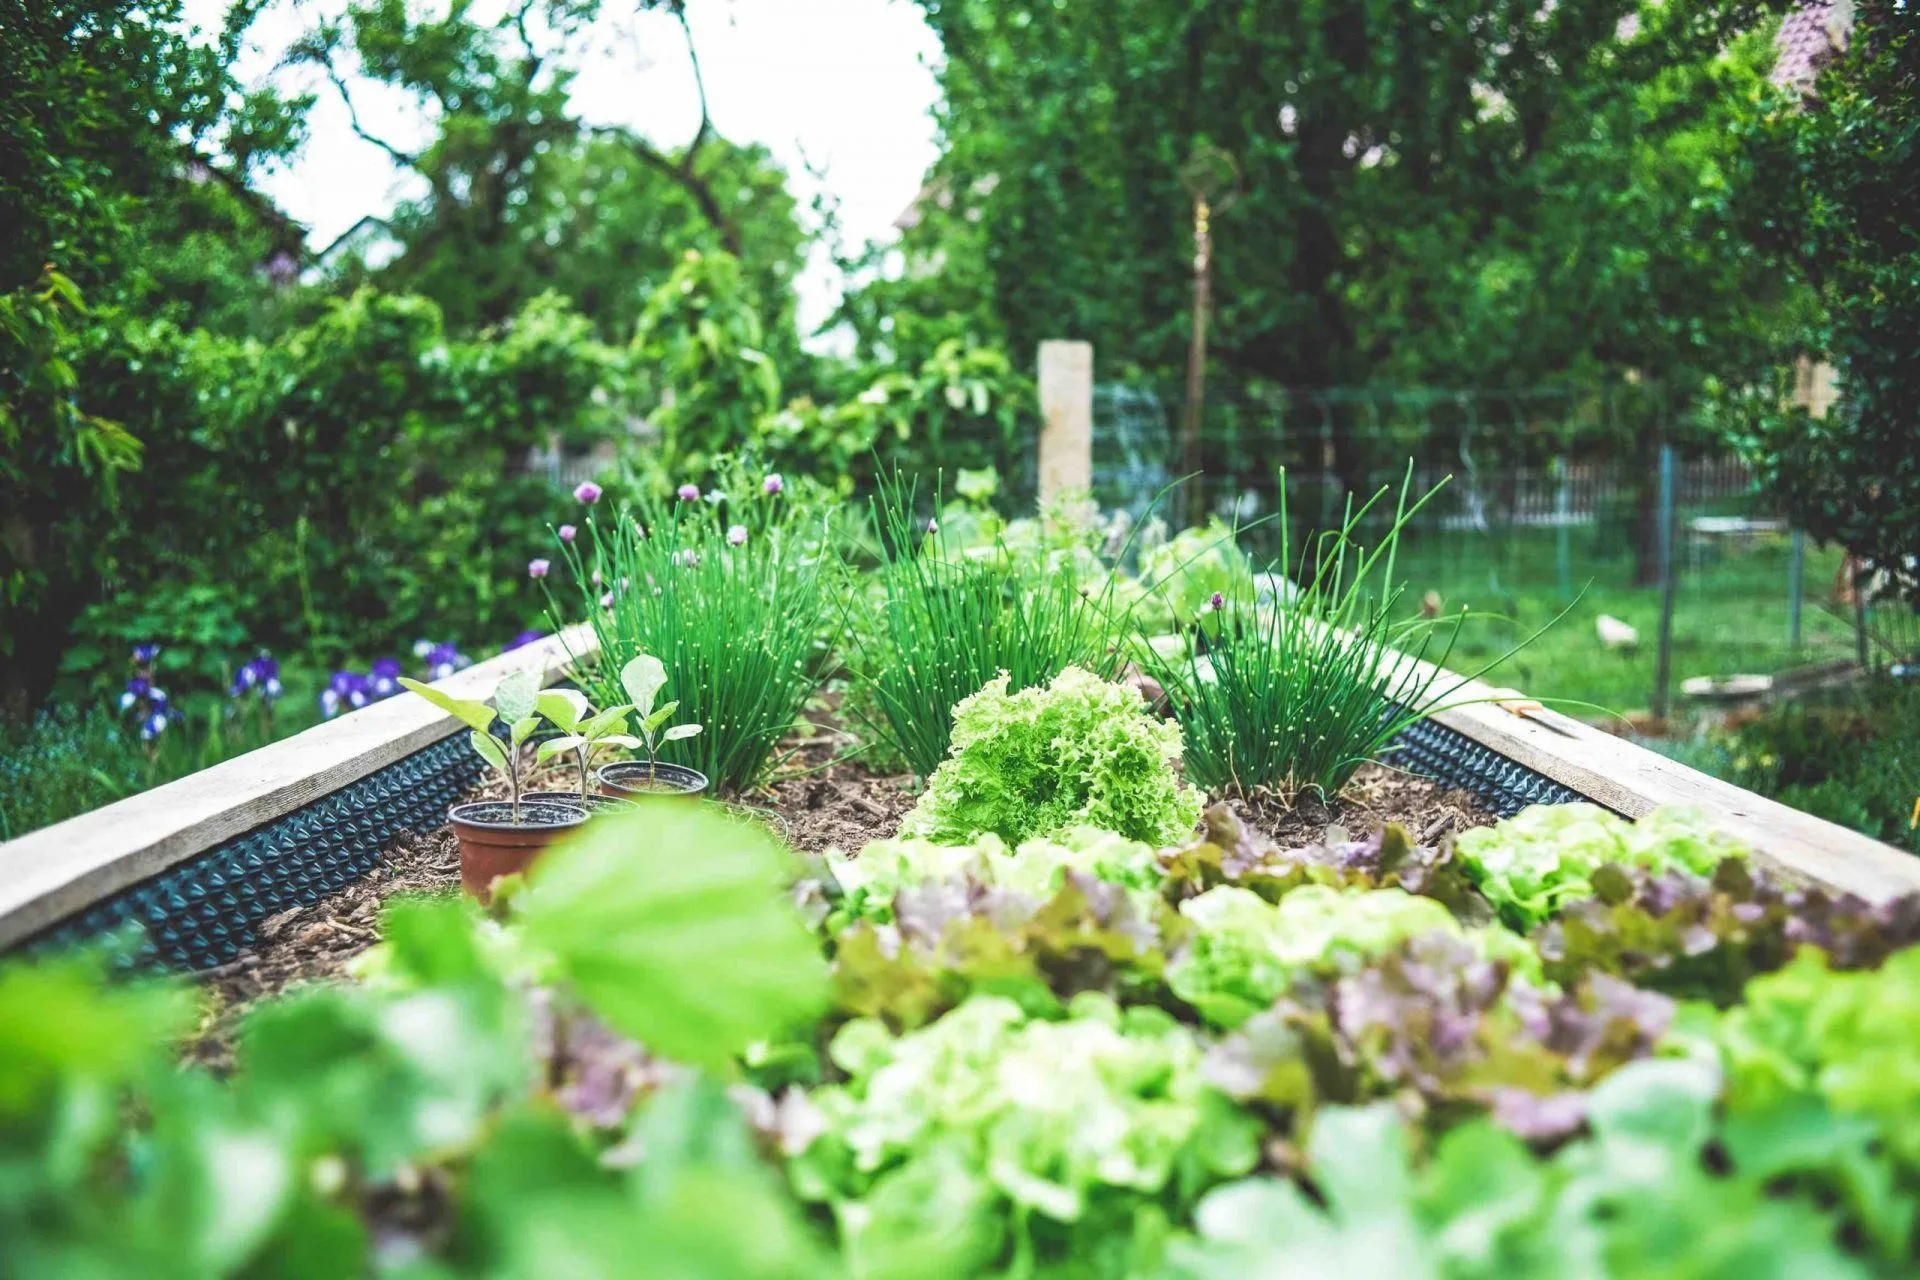 Victoria Gerrard, La Crosse, WI, Shares Why Sustainable Gardening Is Essential To Eating Clean